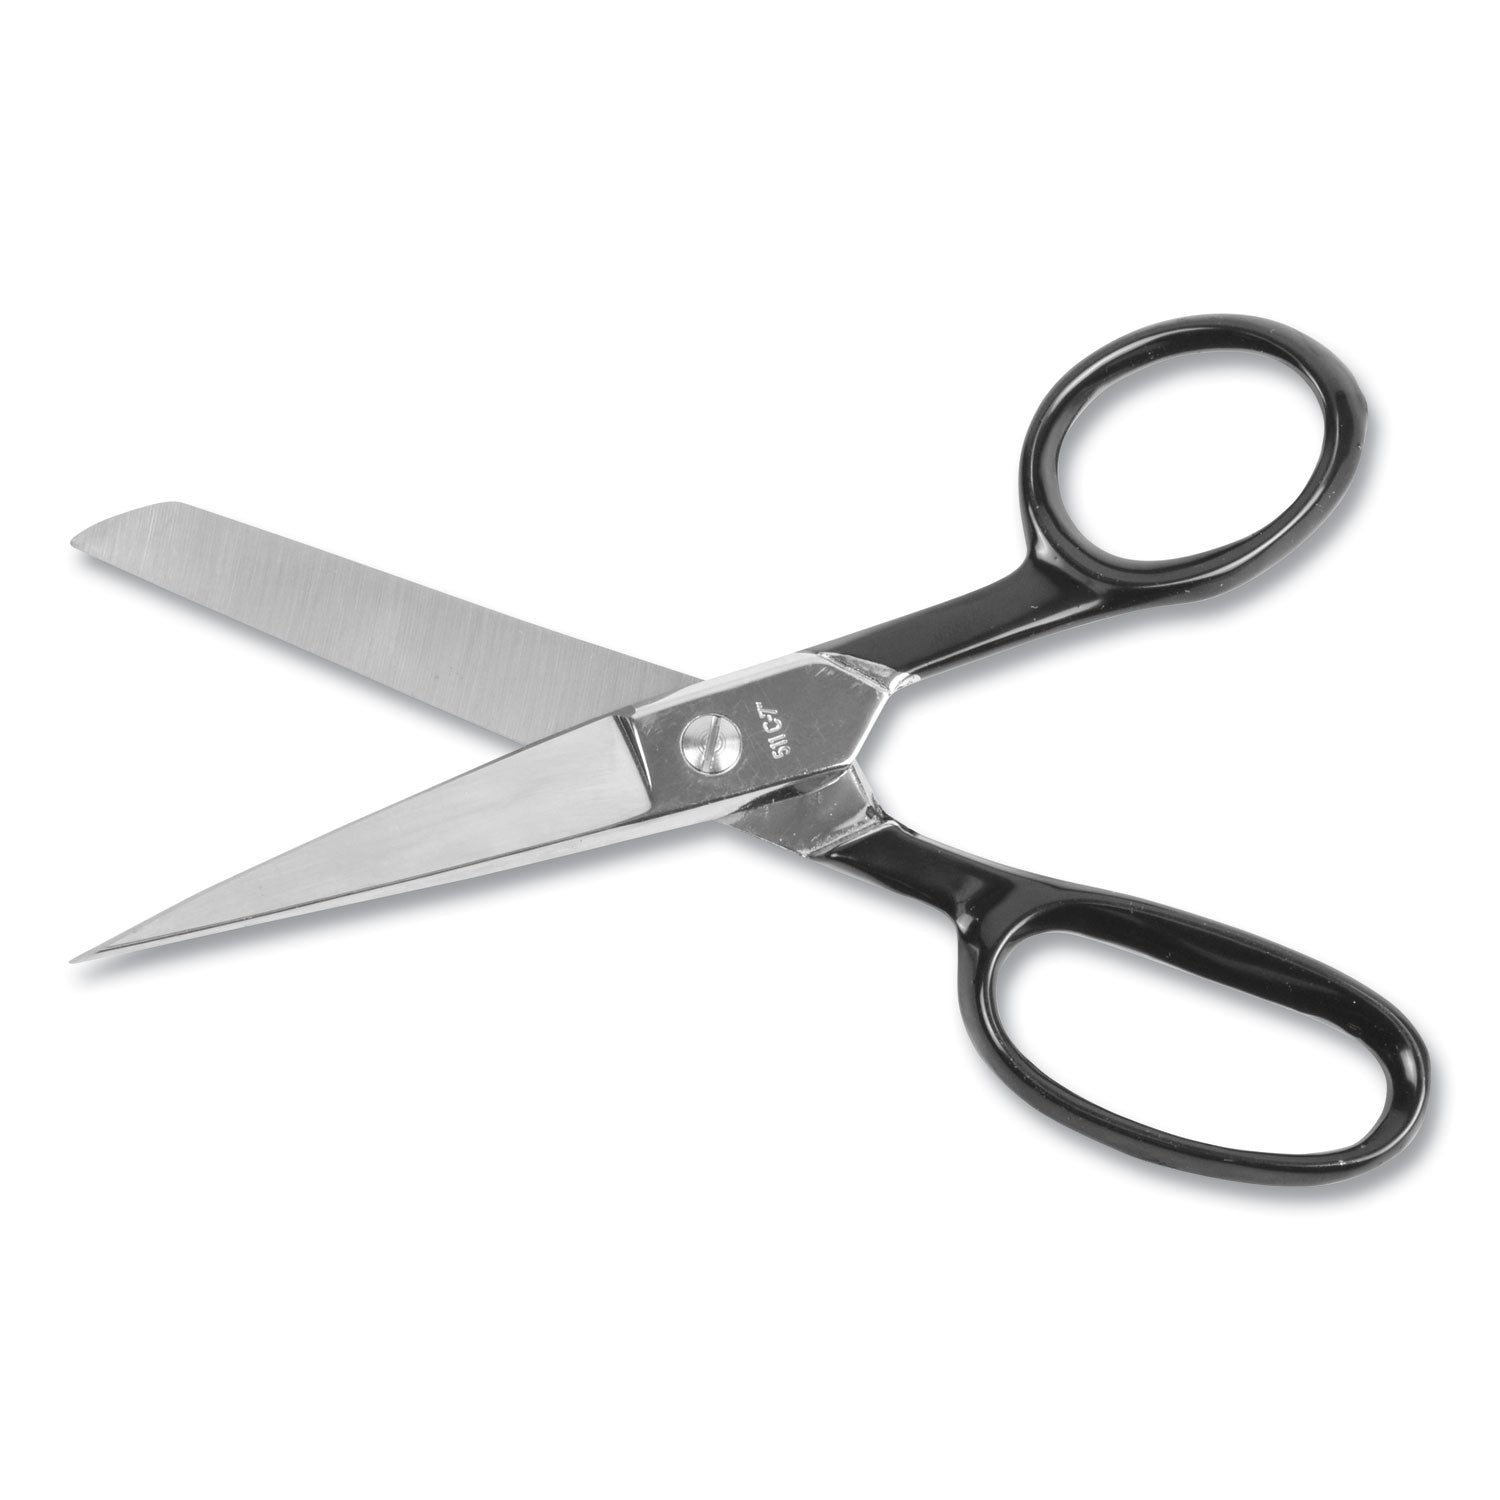 Hot Forged Carbon Steel Shears, 7" Long, 3.13" Cut Length, Black Straight Handle - 